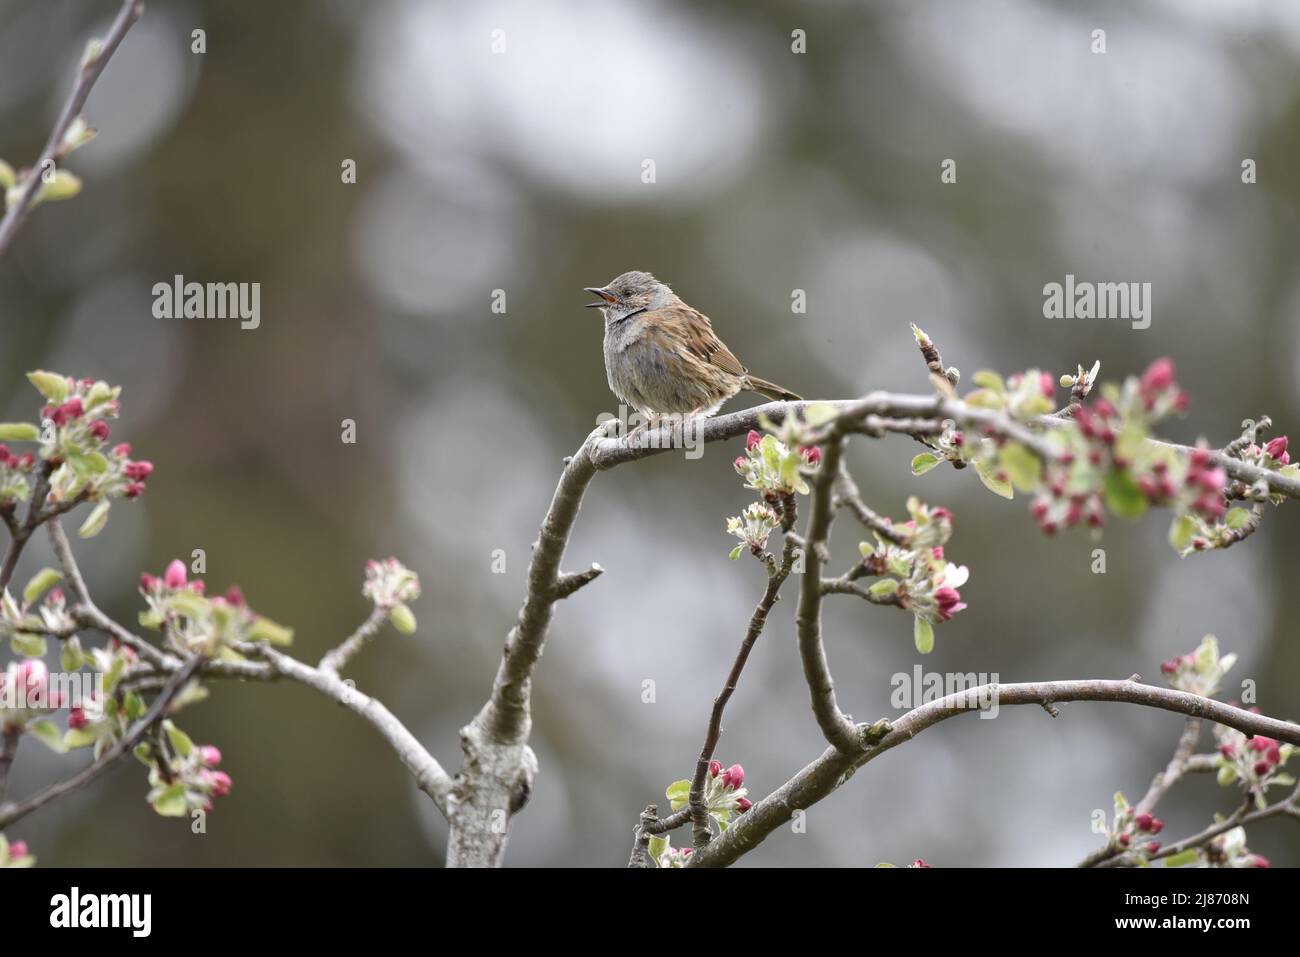 Close-Up Image of a Dunnock (Prunella modularis) Perched in Left-Profile on Branches of Apple Blossom Against a Bokeh Effect Background in Wales, UK Stock Photo